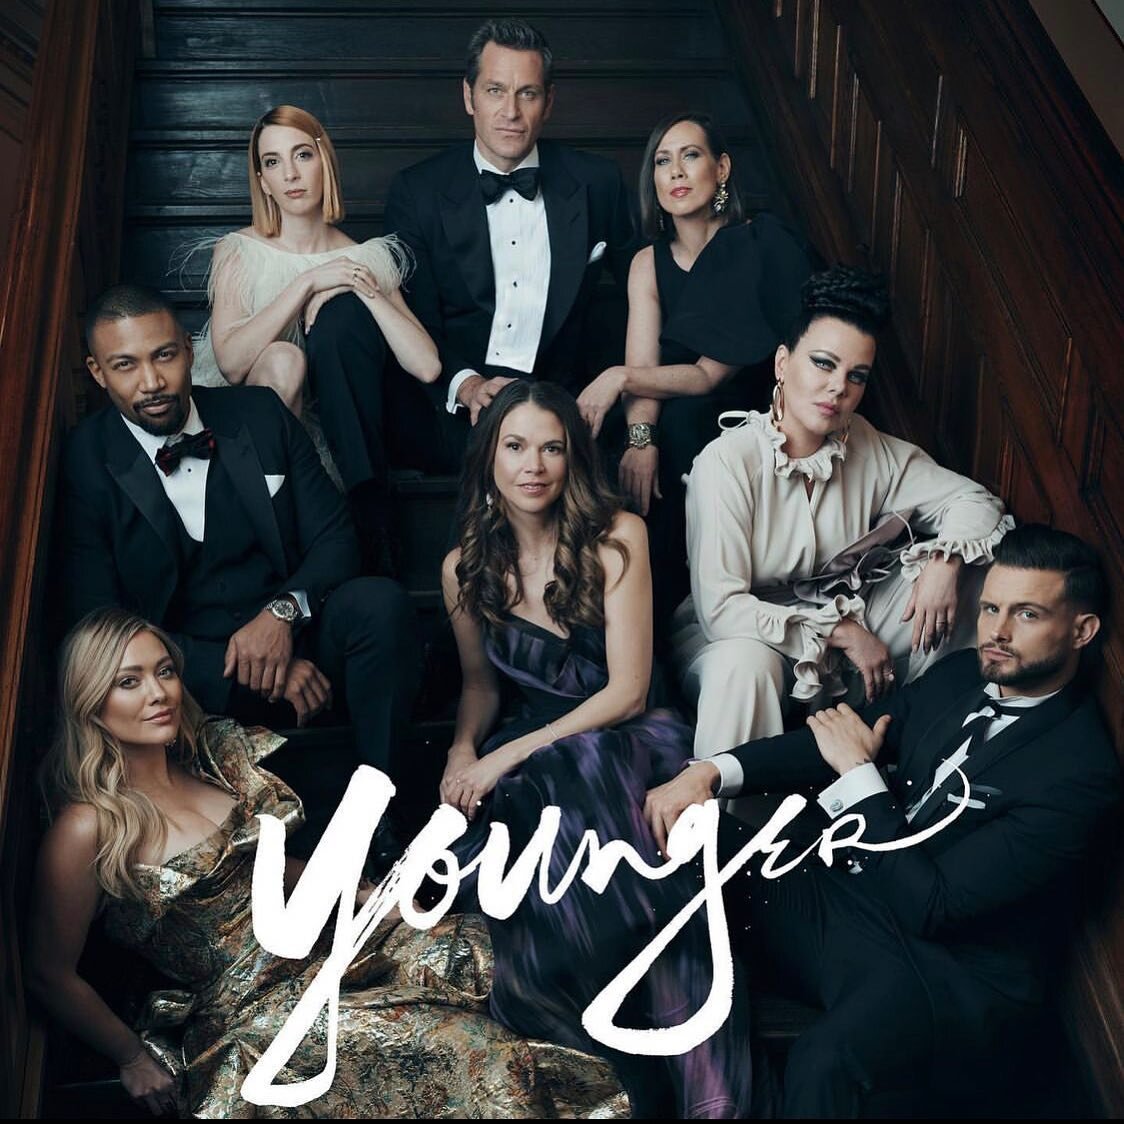 Look for &ldquo;The Edge&rdquo; by @annamaemusic on Ep#1 of the final season of @youngertv 
Produced mixed and mastered by @paigeblue and co-written with @annamaemusic @shanahalligan #🙏🏼🙏🏼🙏🏼